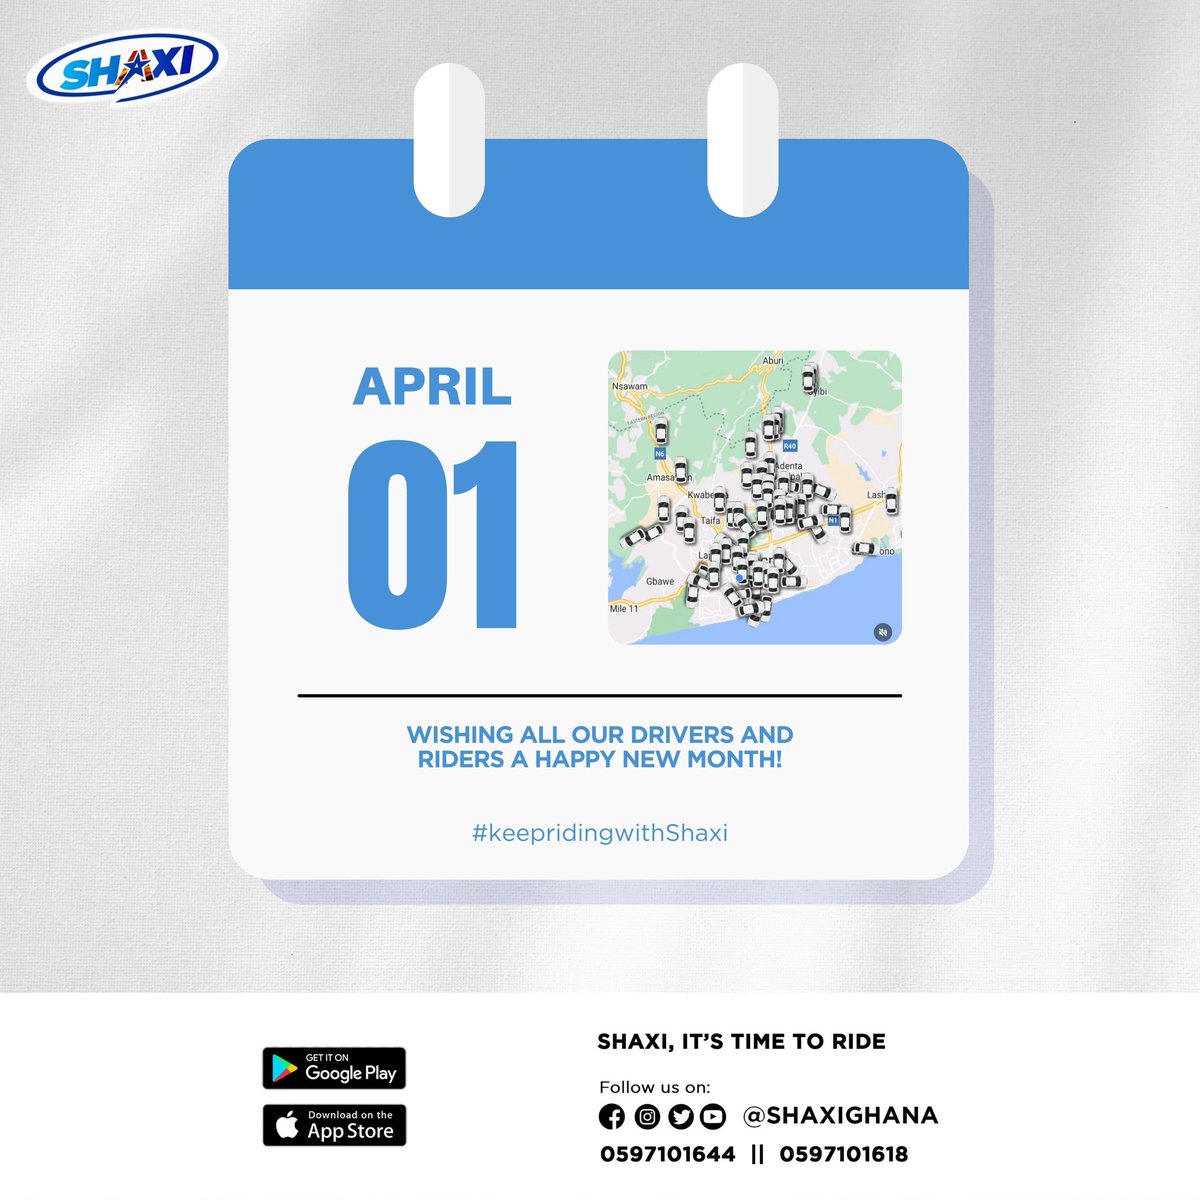 Happy New Month to our lovely and potential customers #shaxi it’s time to ride #shaxi #newmonth #April